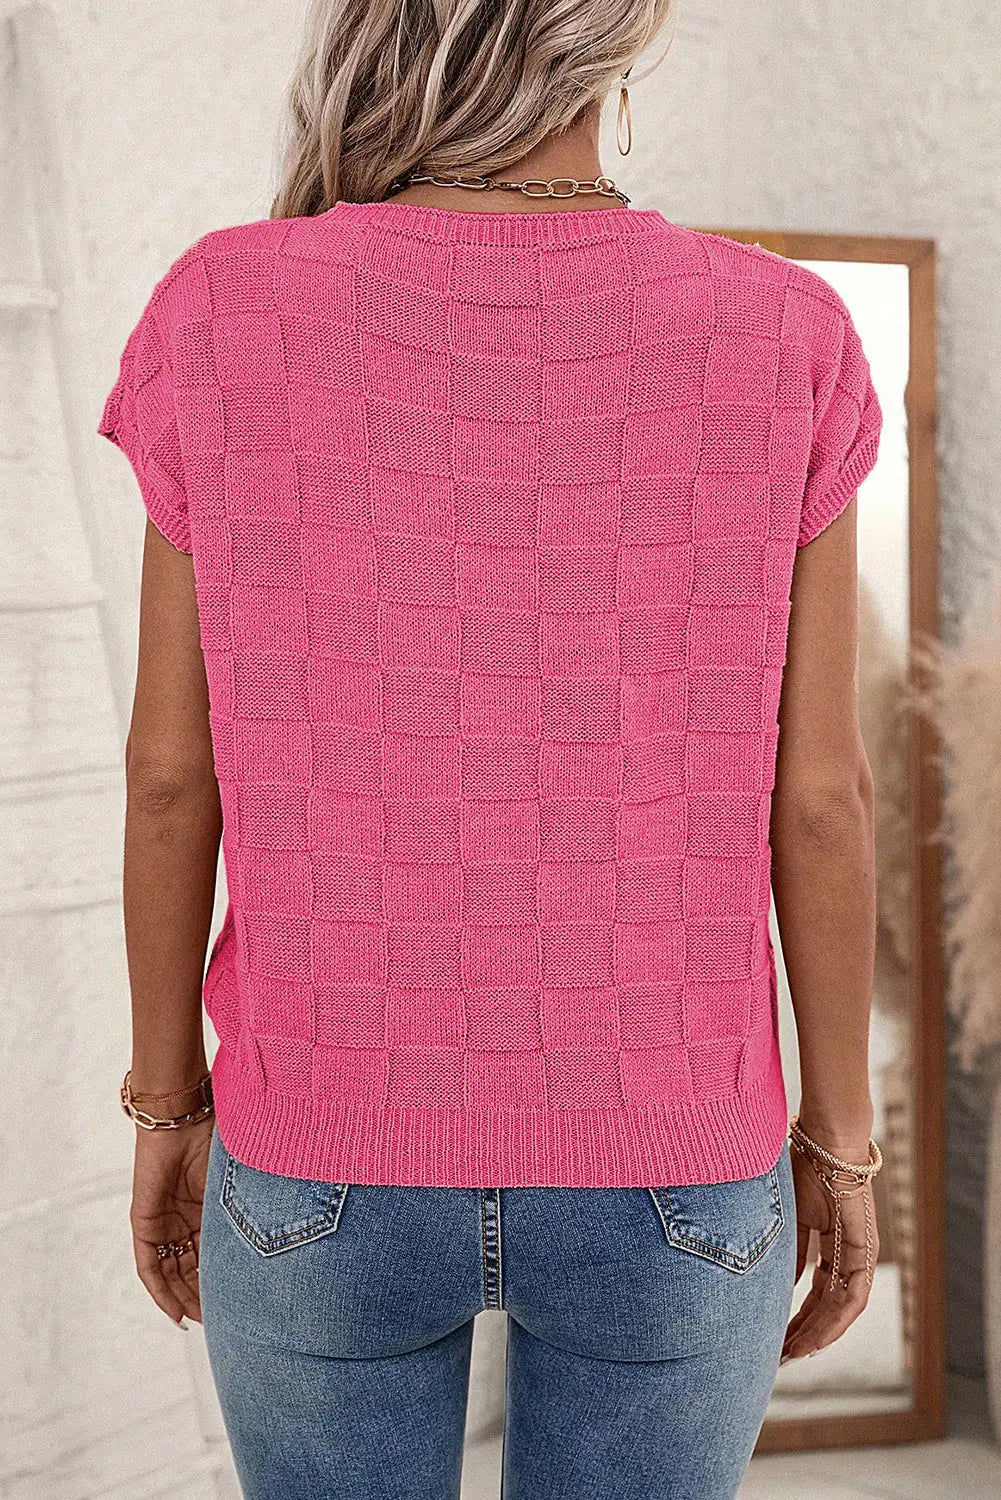 Bright pink lattice textured knit short sleeve sweater - sweaters & cardigans